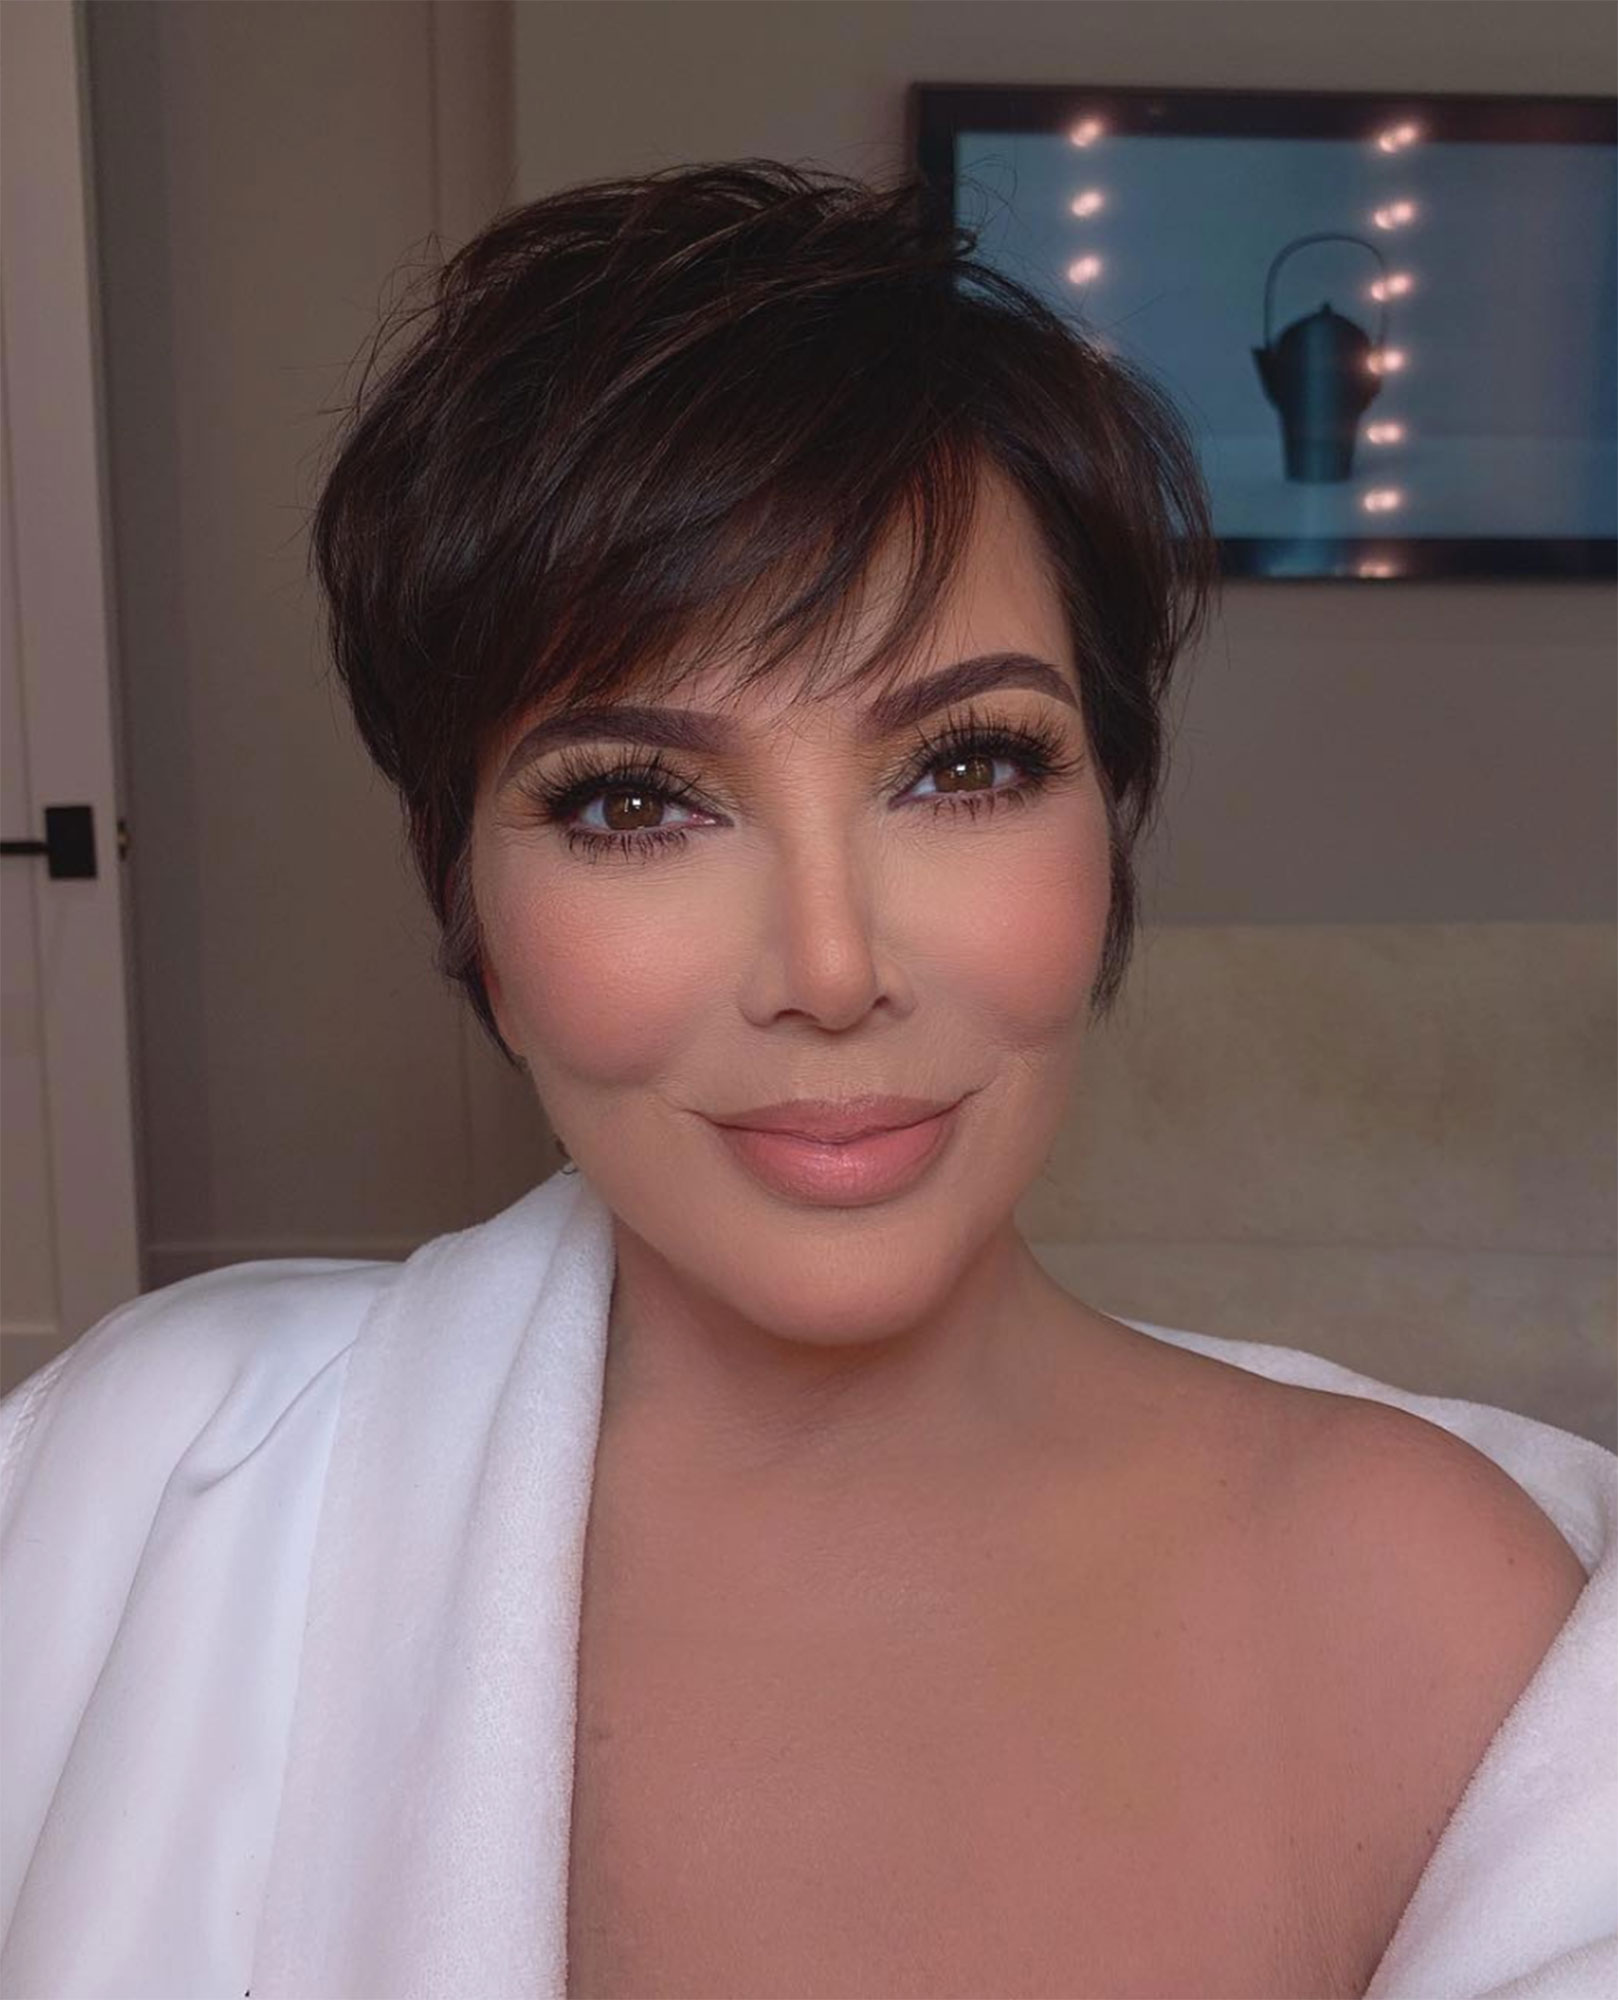 Kris Jenner's Makeup Trick Uses Two Kylie Powders: Details